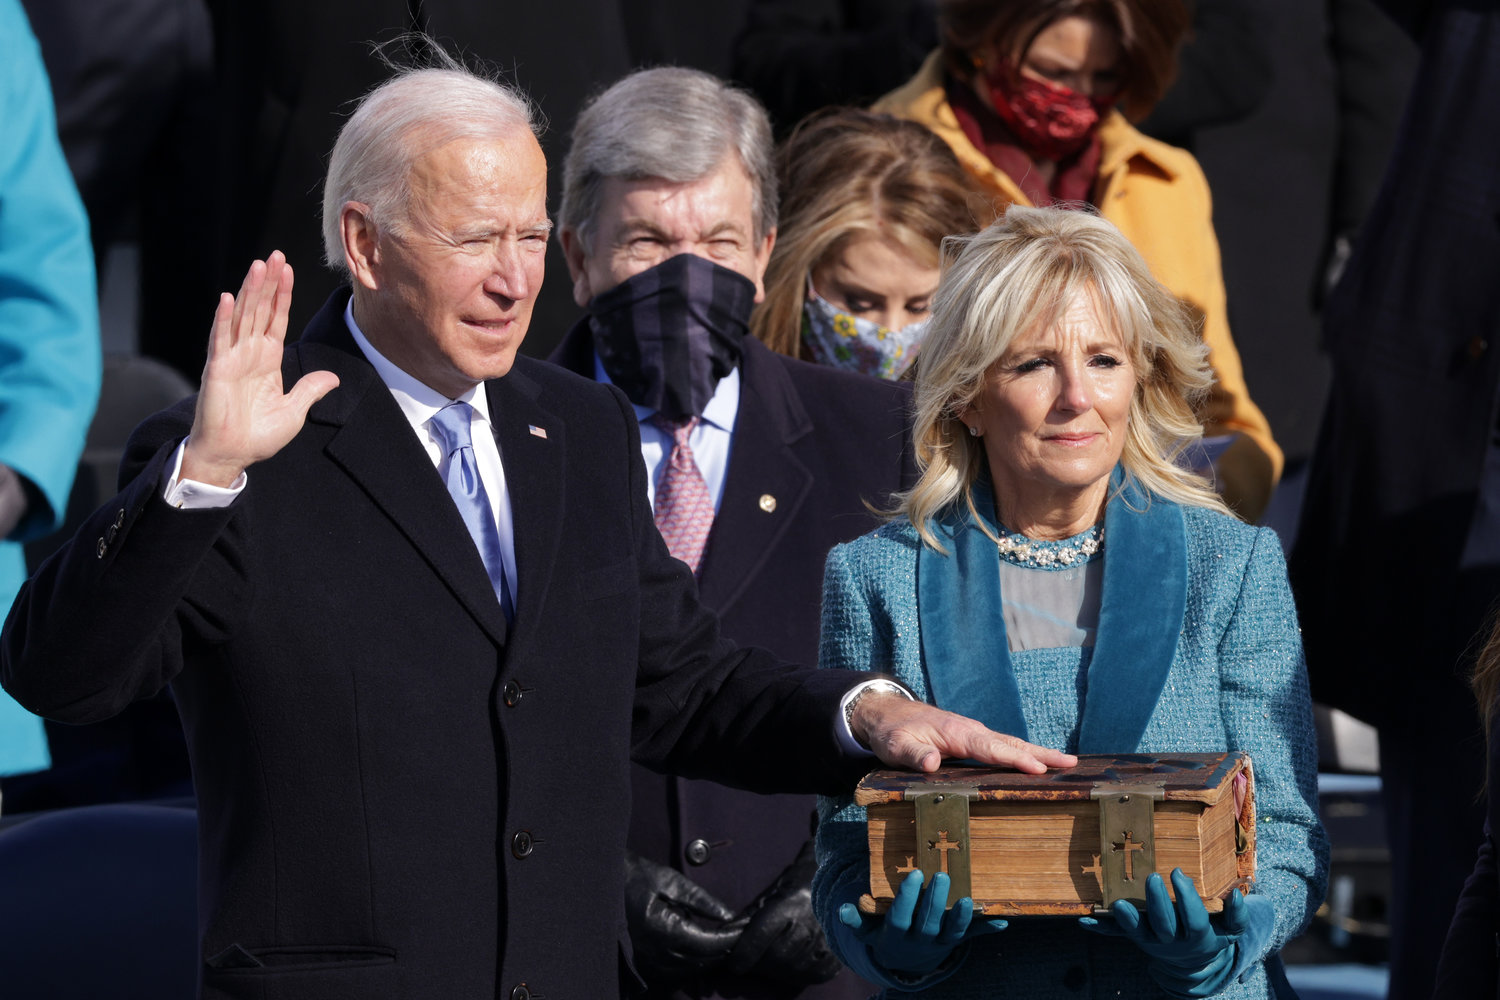 Joe Biden is sworn in as U.S. President during his inauguration on the West Front of the U.S. Capitol on January 20, 2021, in Washington, D.C. (Alex Wong/Getty Images/TNS)